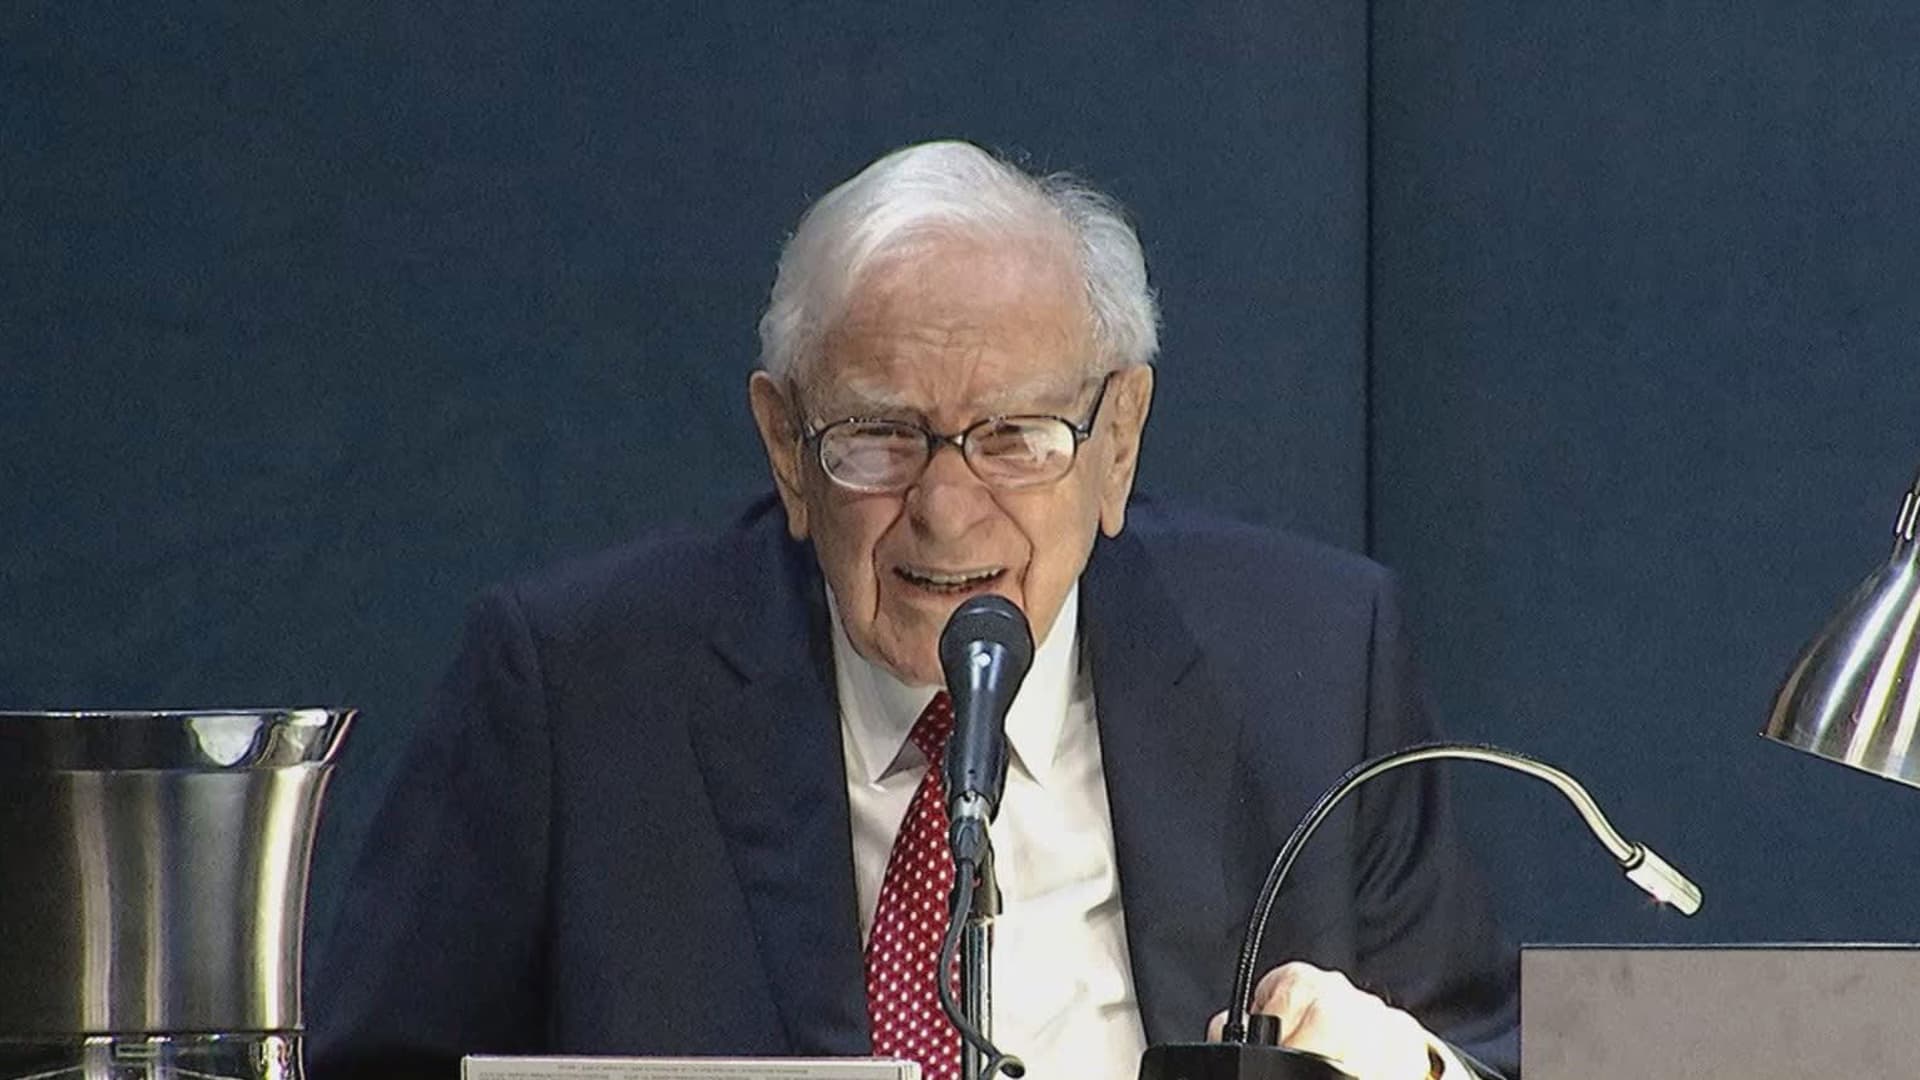 Buffett says Berkshire sold its entire Paramount stake: 'We lost quite a bit of money'